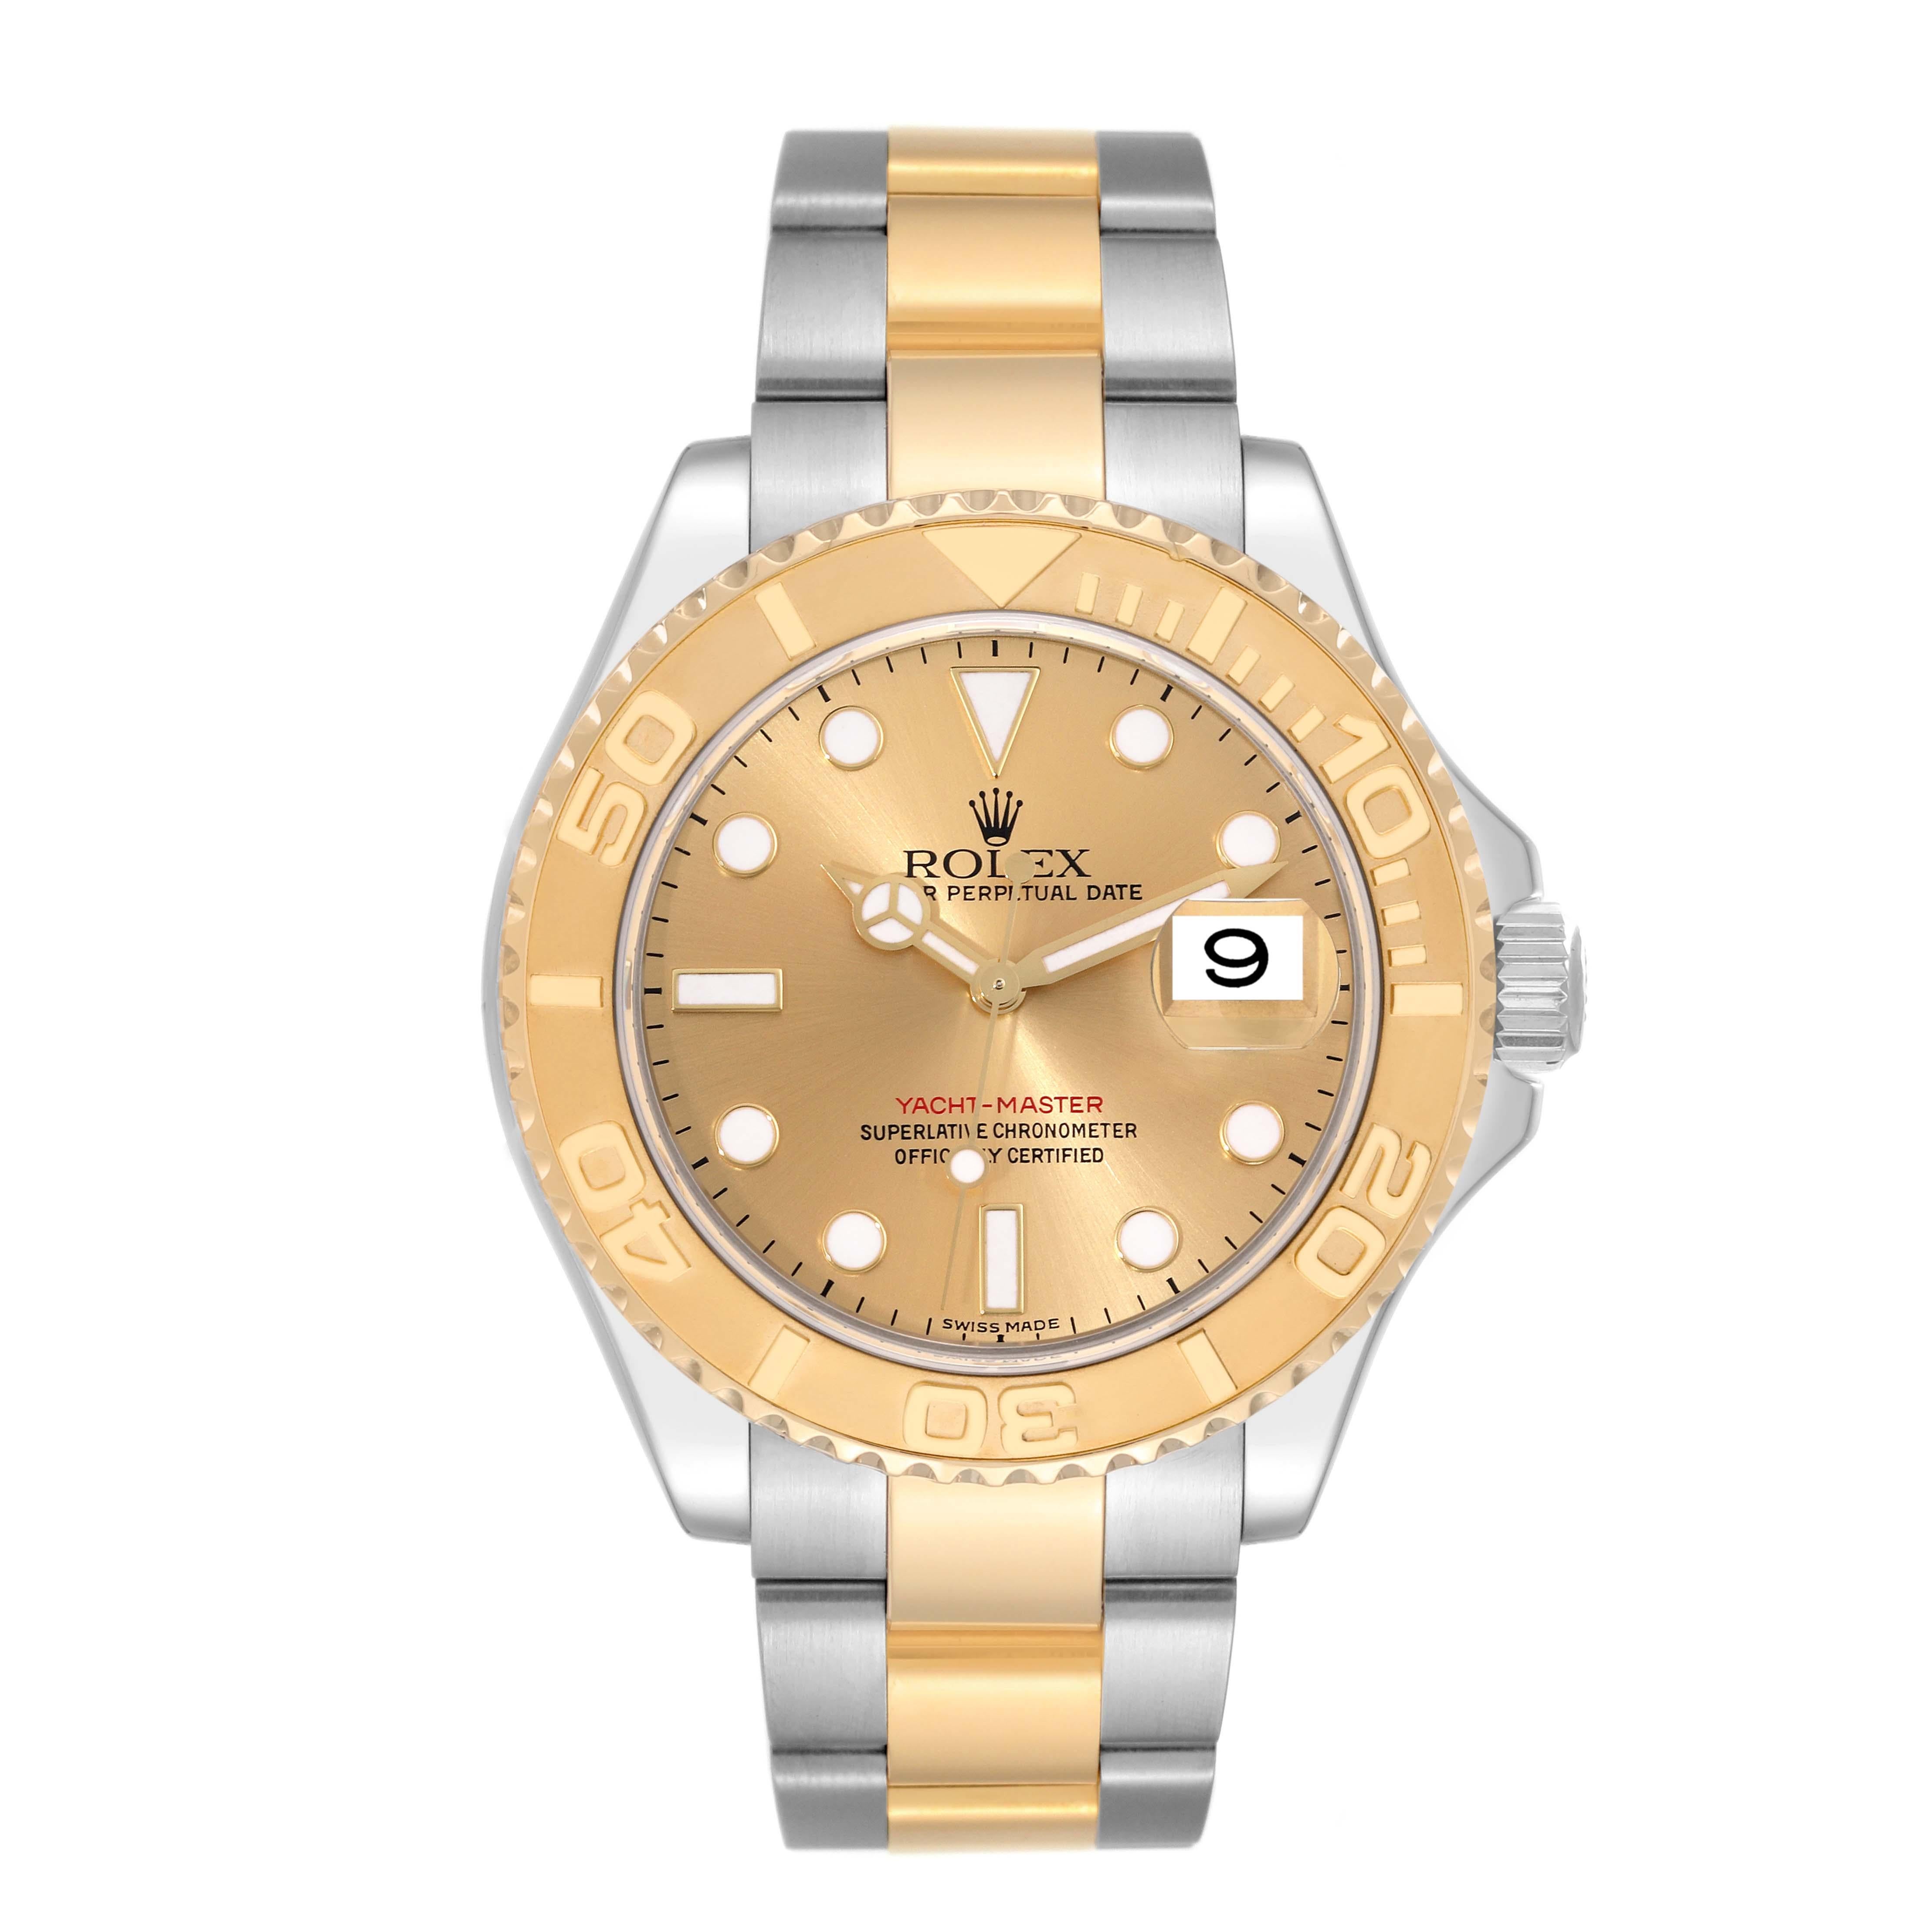 Rolex Yachtmaster Steel Yellow Gold Champagne Dial Mens Watch 16623 Box Card. Officially certified chronometer self-winding movement. Stainless steel case 40 mm in diameter. Rolex logo on a crown. 18k yellow gold special time-lapse bidirectional